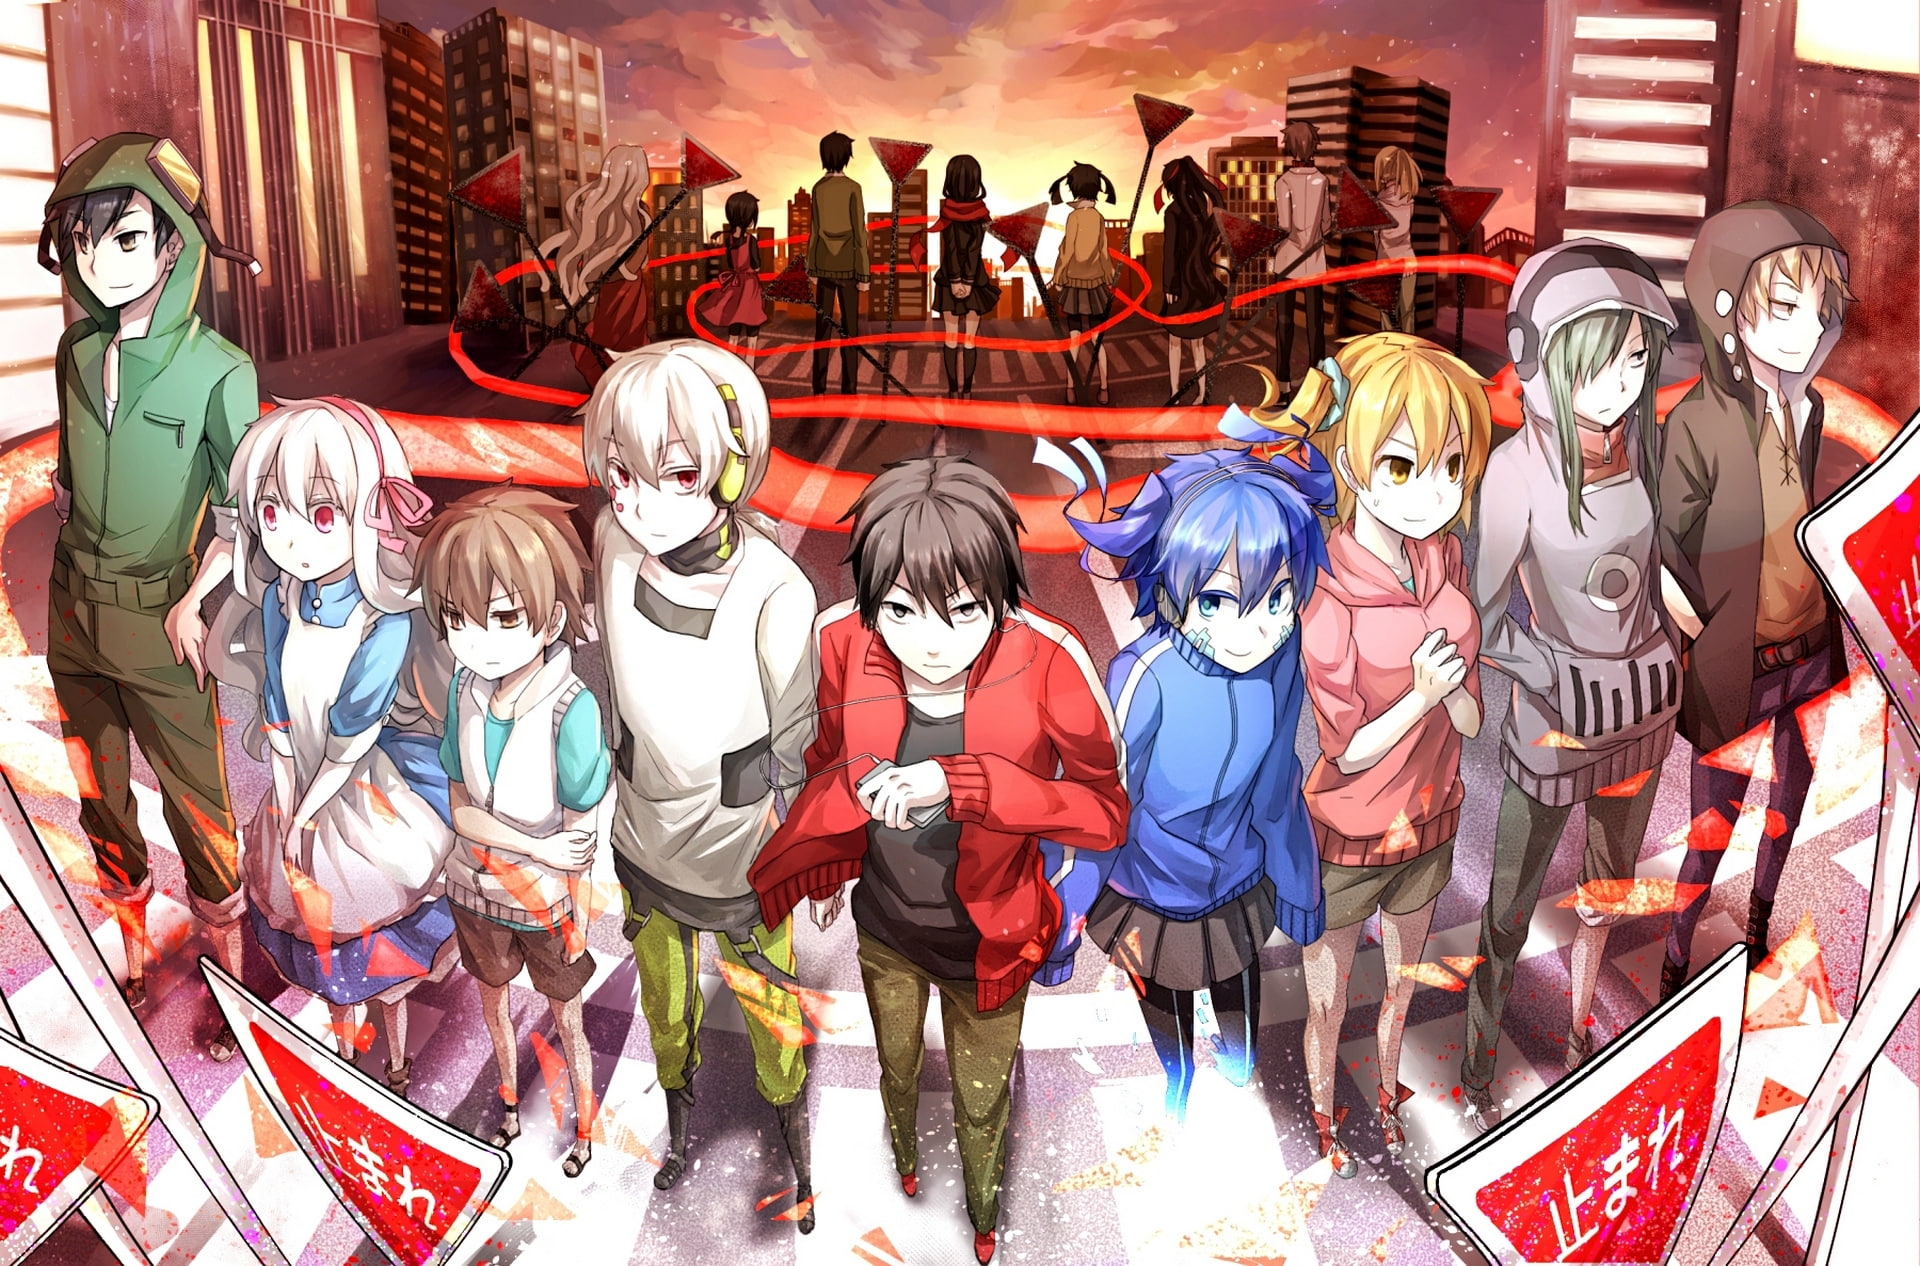 anime characters, sunset, the city, girls, home, headphones, signs